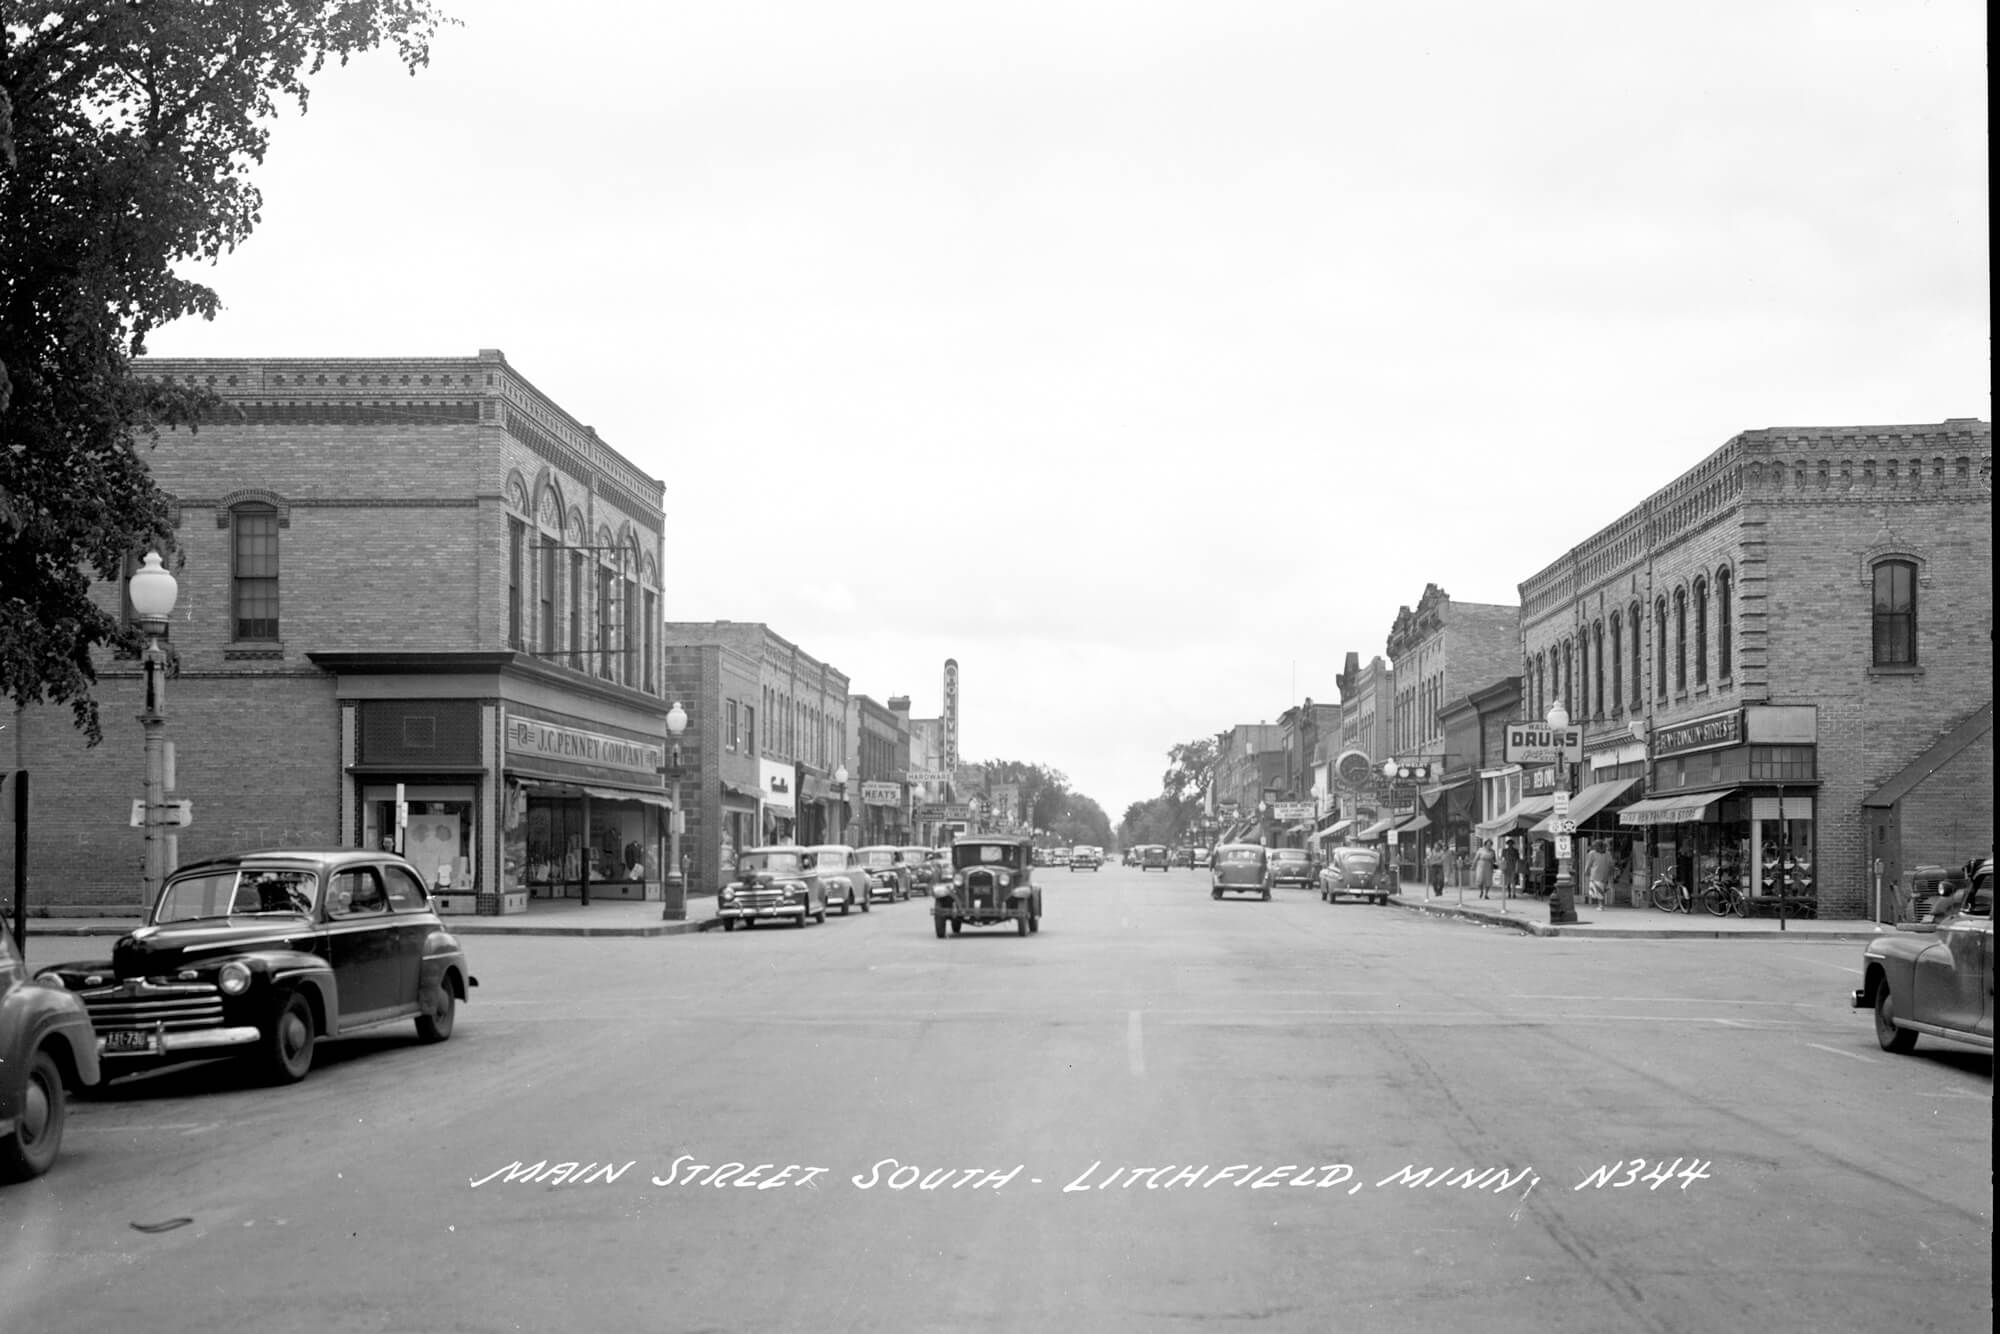 A historic photo of downtown Litchfield